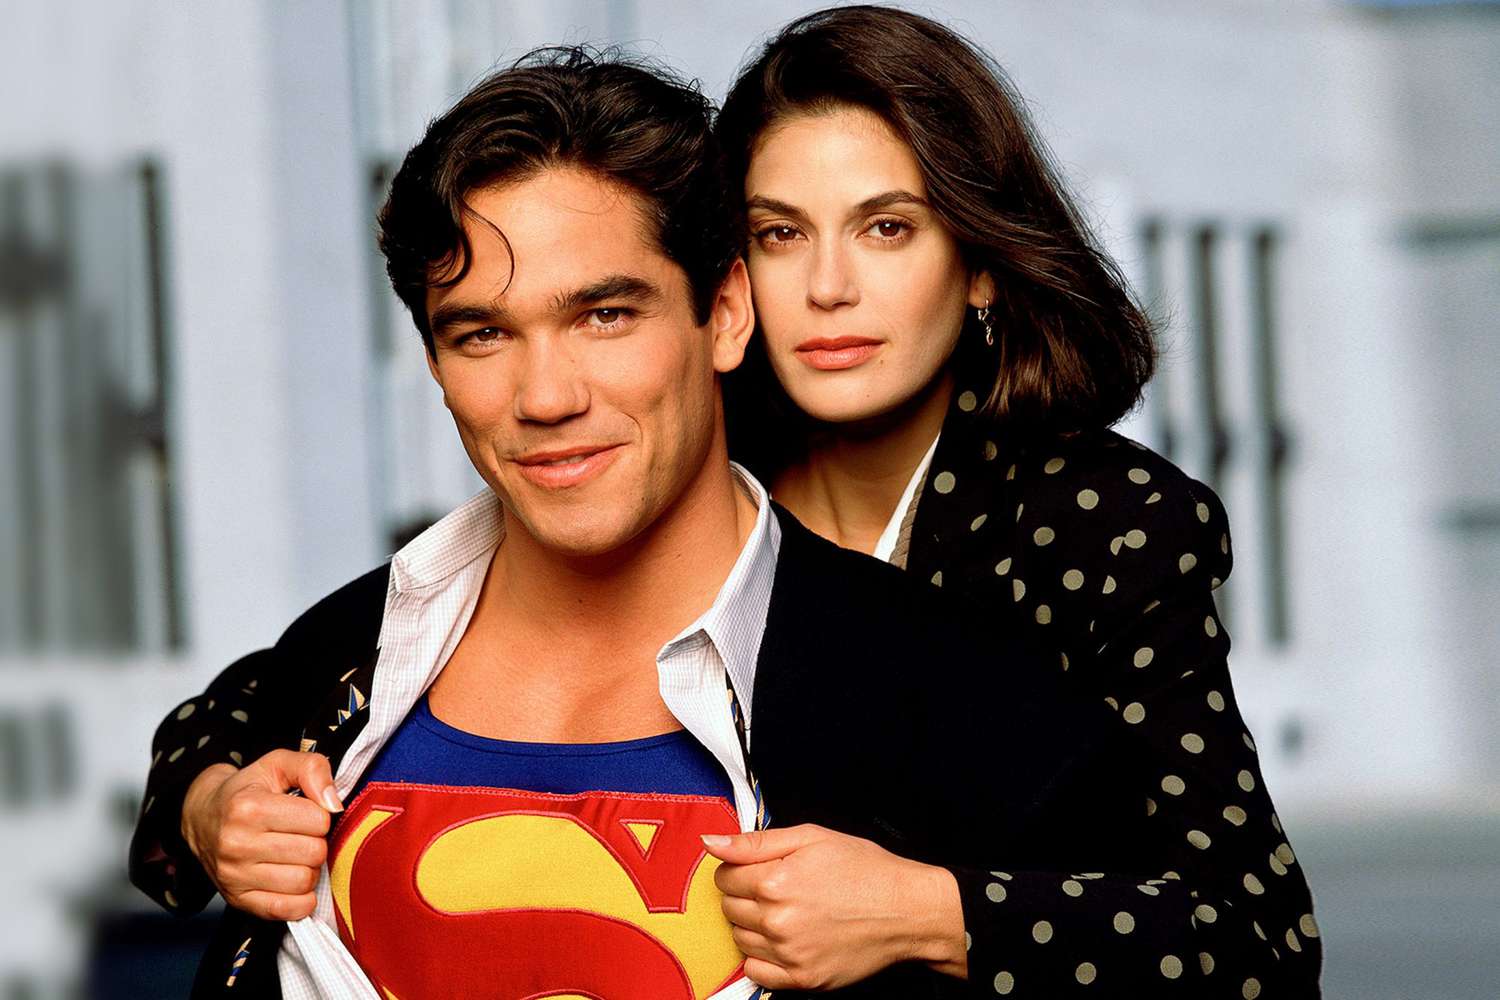 Dean Cain as Superman with Lois Lane pulling open his shirt to reveal the "S" logo.